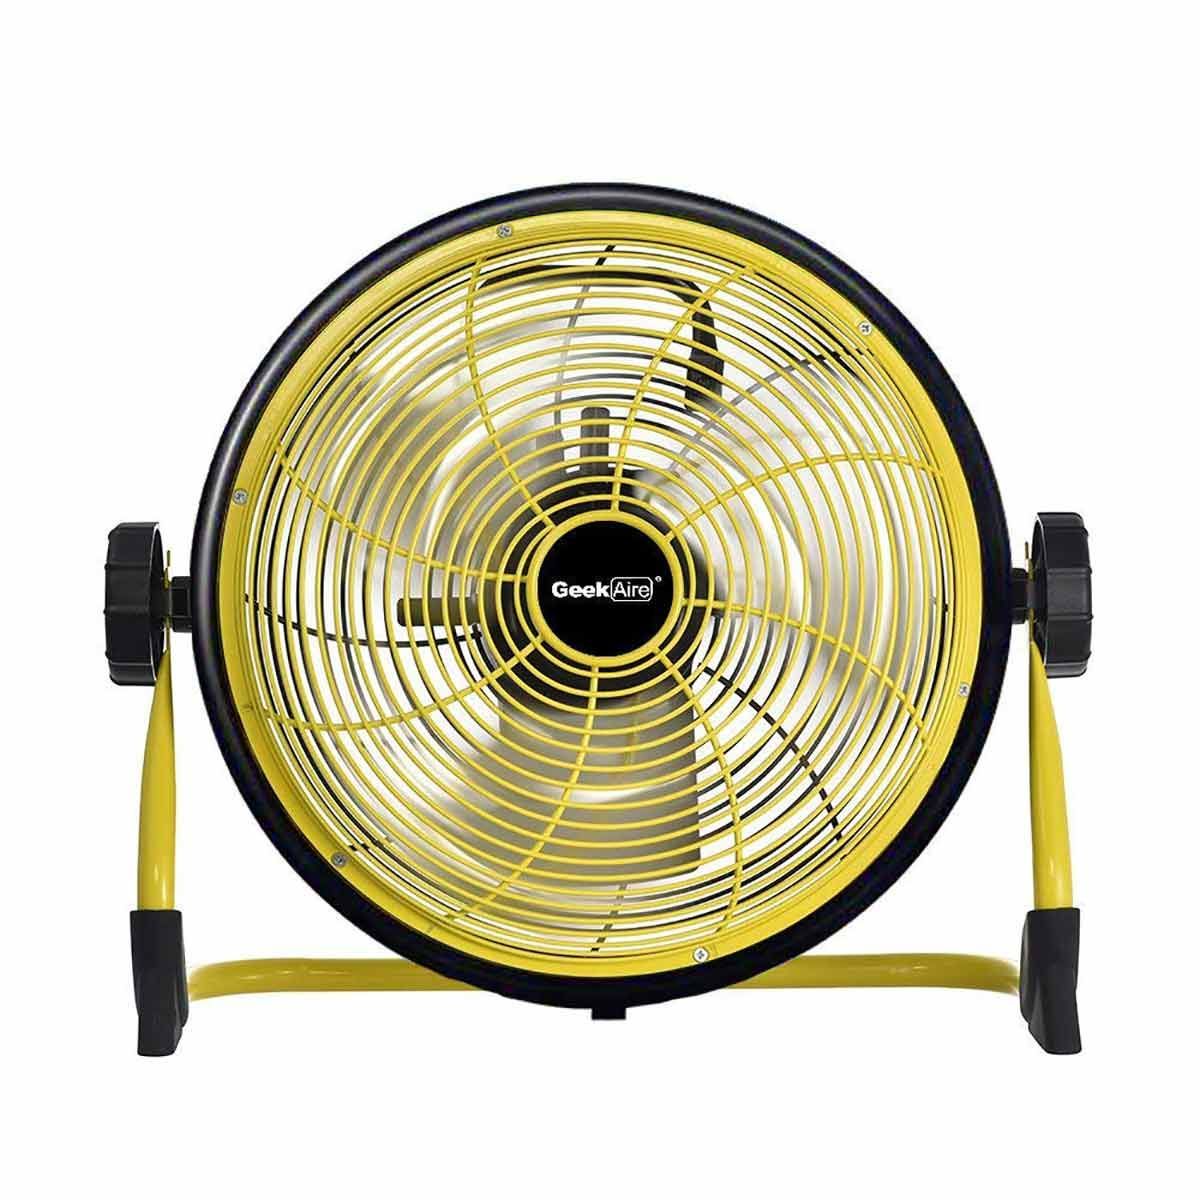 Geek Aire Rechargeable Table Fan - 12 Inch (Yellow)